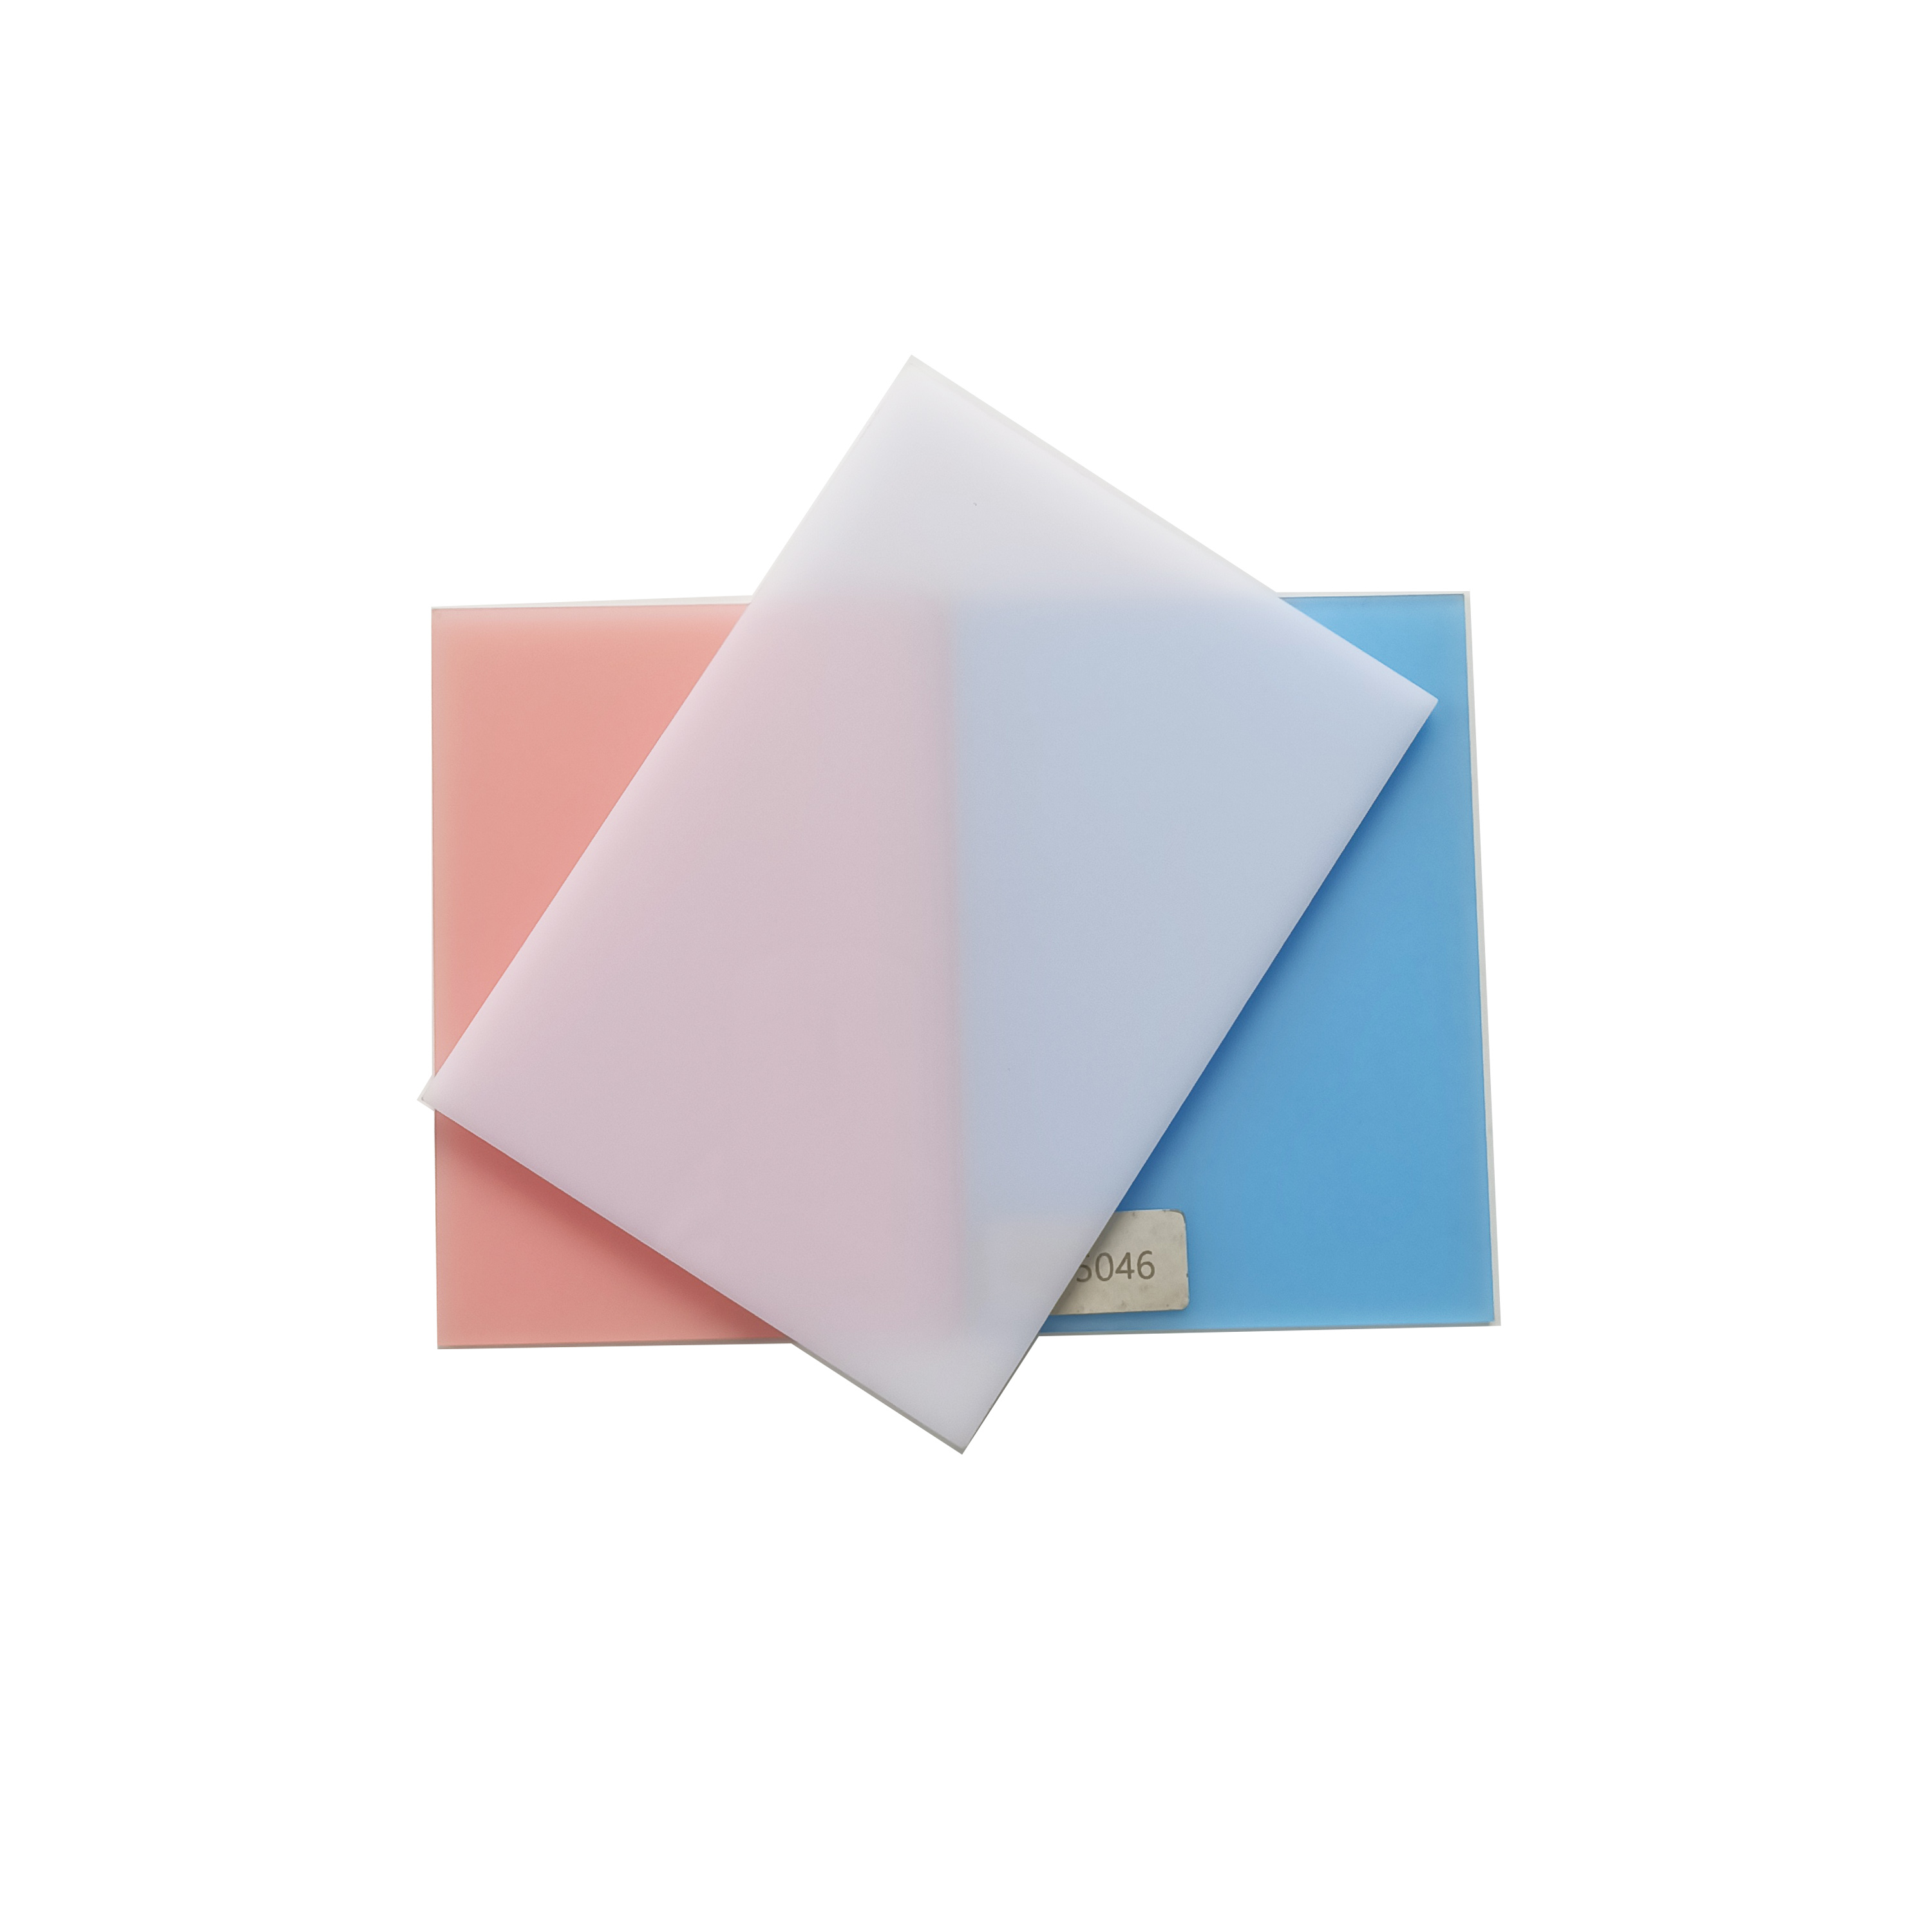 5x7 Sublimation Acrylic Sheets 3 Mm Acrylic Sheets Clear Acrylic Sheets 6mm 1.5 Feet by 4 Feet